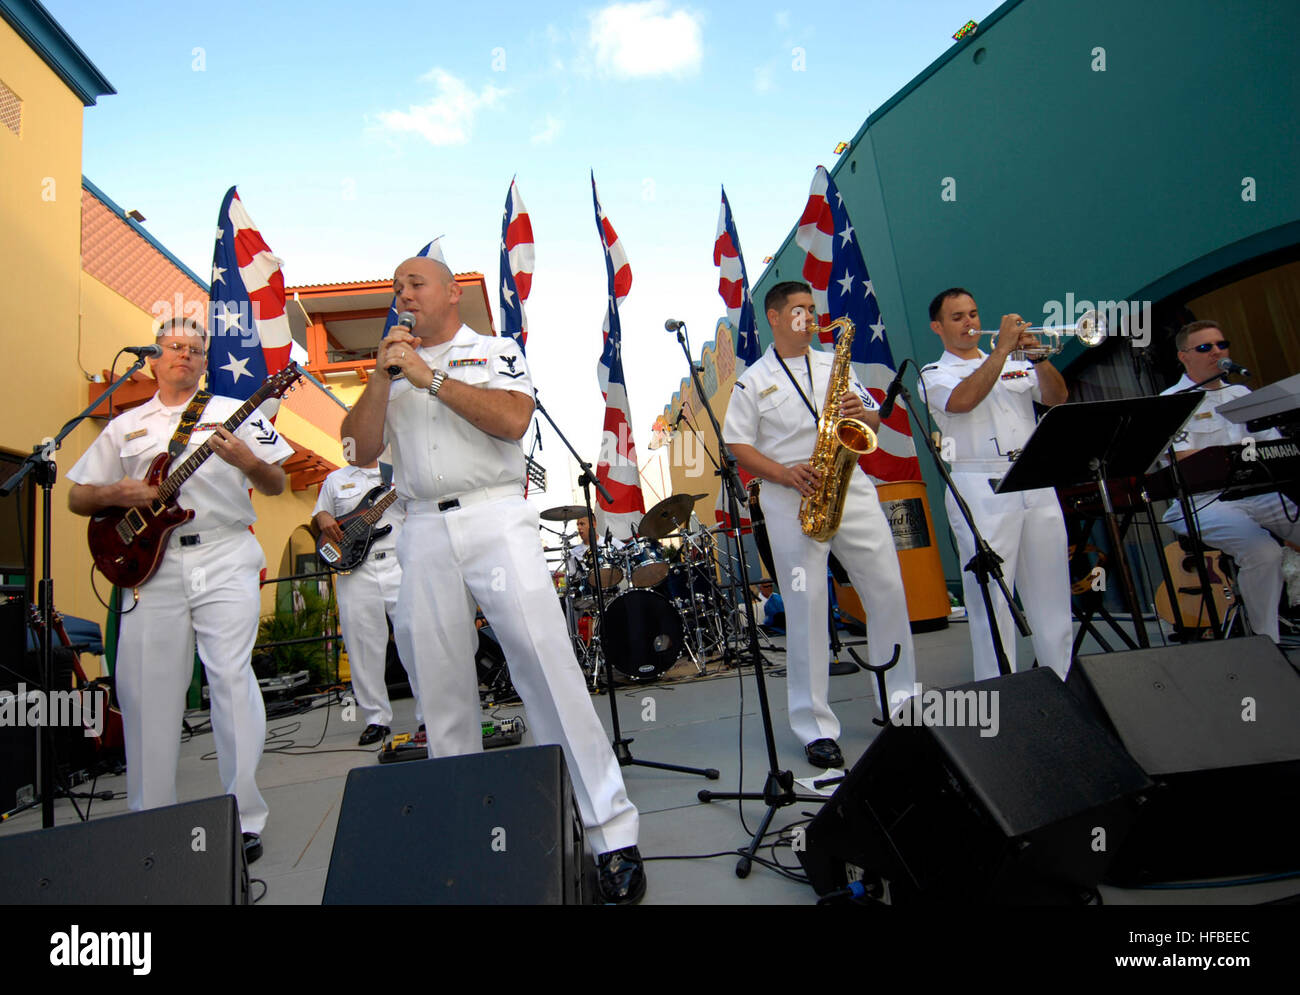 Members of the Navy Region Southeast rock band, Pride, from left, Petty Officer 2nd Class Chris Morrison, guitar; Petty Officer 3rd Class Sean Meyer, vocals; Petty Officer 3rd Class Chris Castro, drums; Petty Officer 1st Class Louis Lebron, Saxophone; Petty Officer 3rd Class Jorge Argueta, trumpet and Petty Officer 3rd Class Gene Register, keyboards; entertain the crowd at the Seminole Hard Rock Hotel and Casino in Hollywood, Fla. More than 1,000 Sailors, Marines and Coast Guardsmen from the amphibious dock landing ship USS Ashland, the guided-missile destroyer USS Forrest Sherman, the Los-Ang Stock Photo